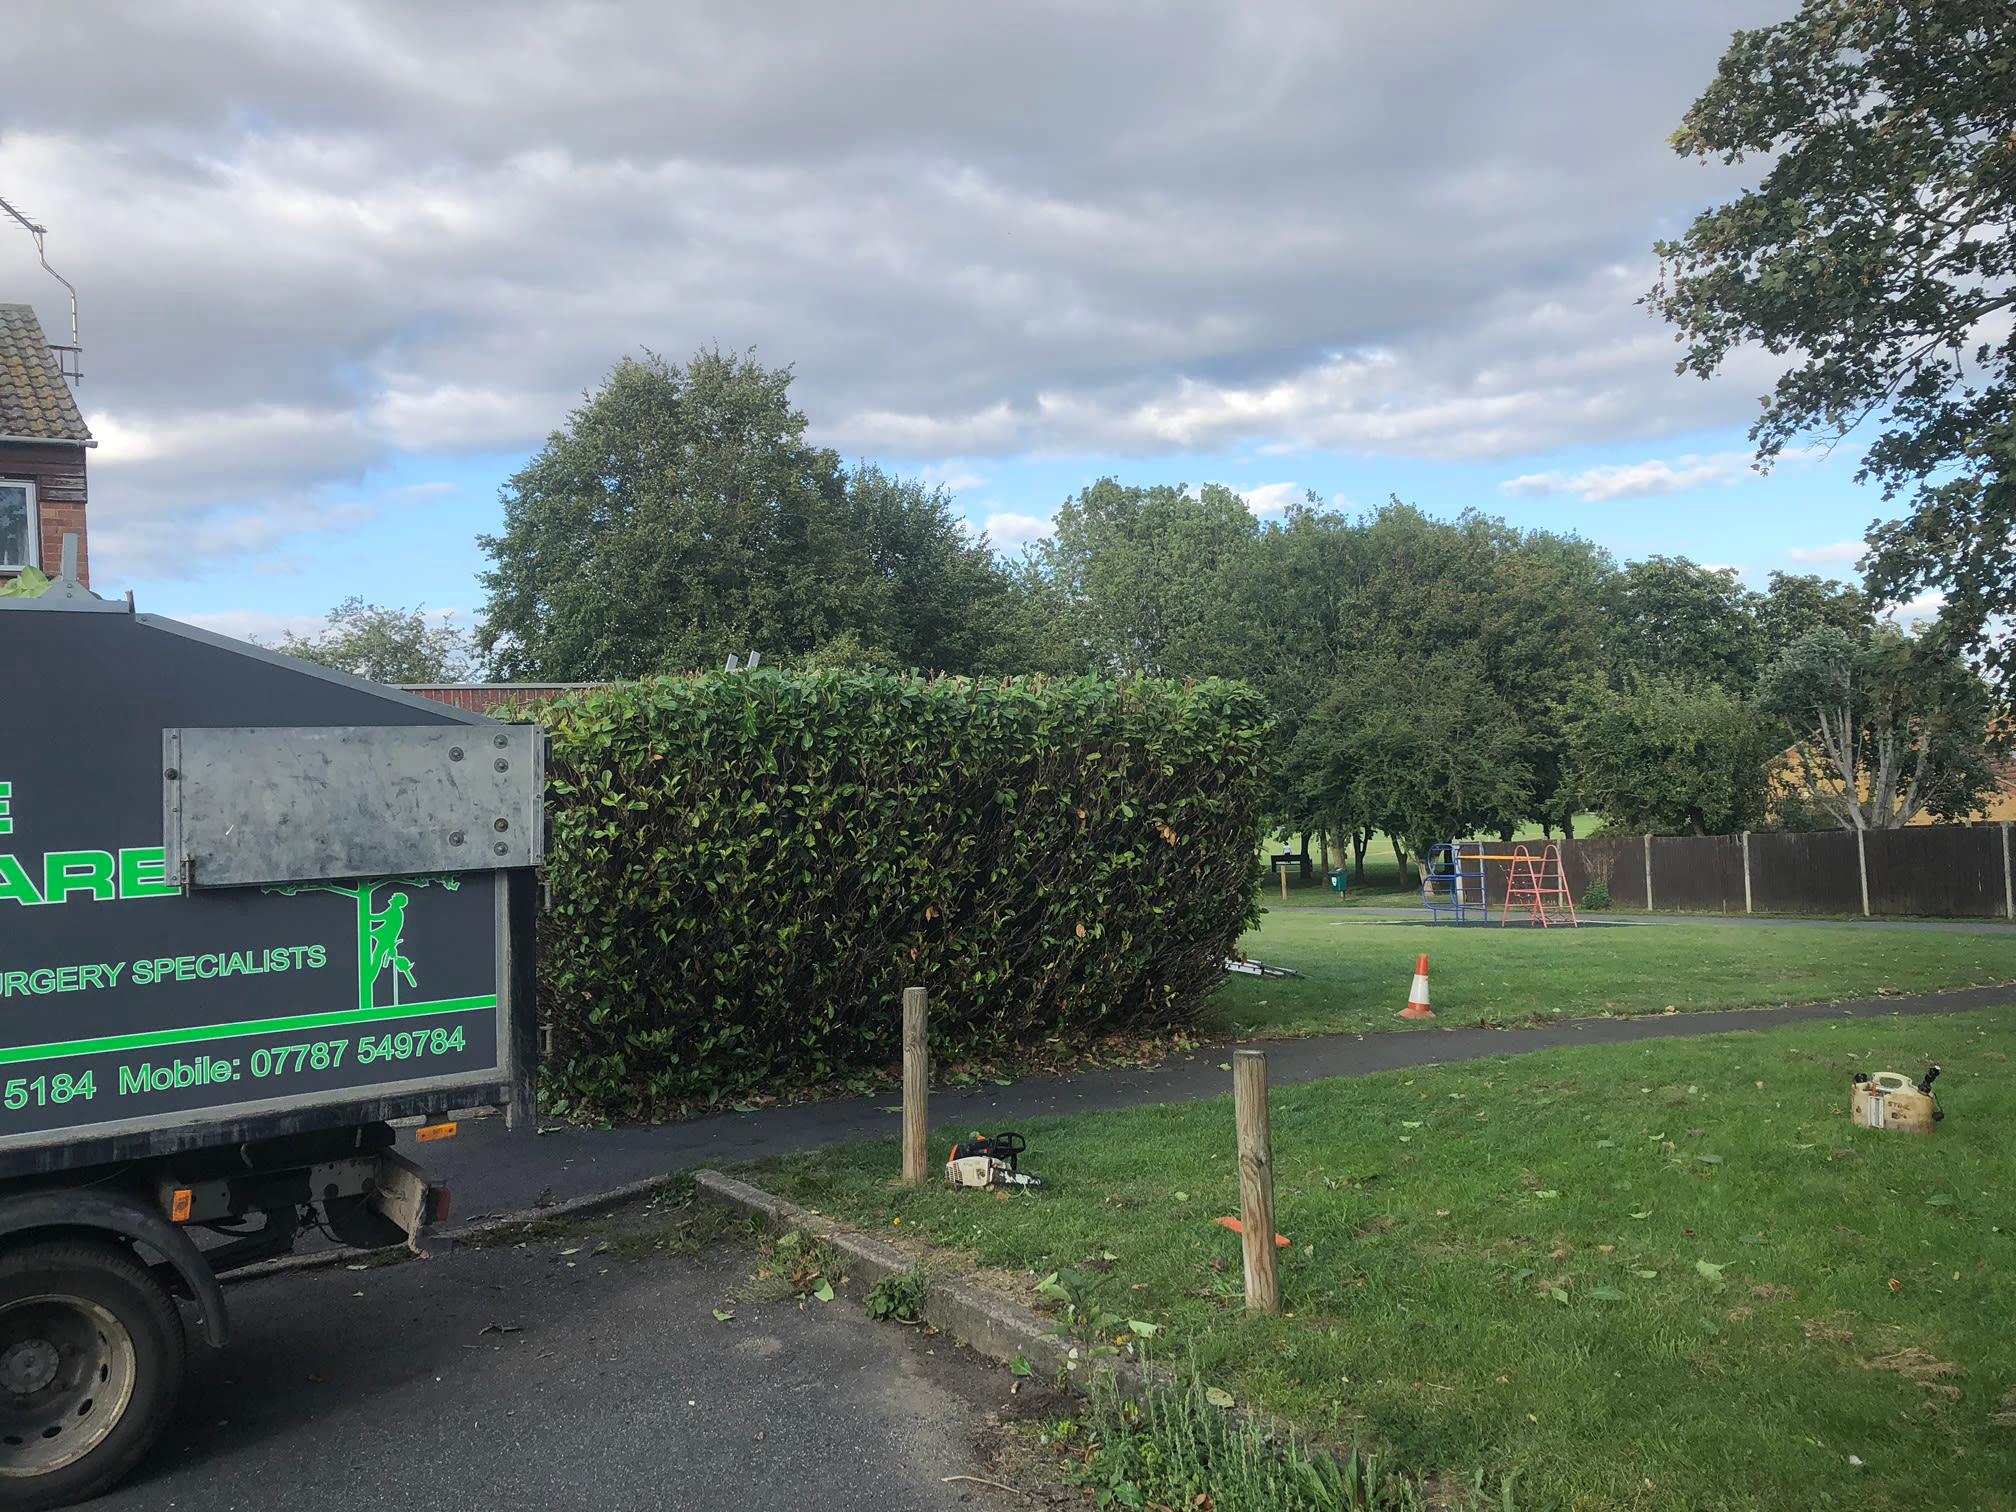 Images LW Tree and Hedge Care